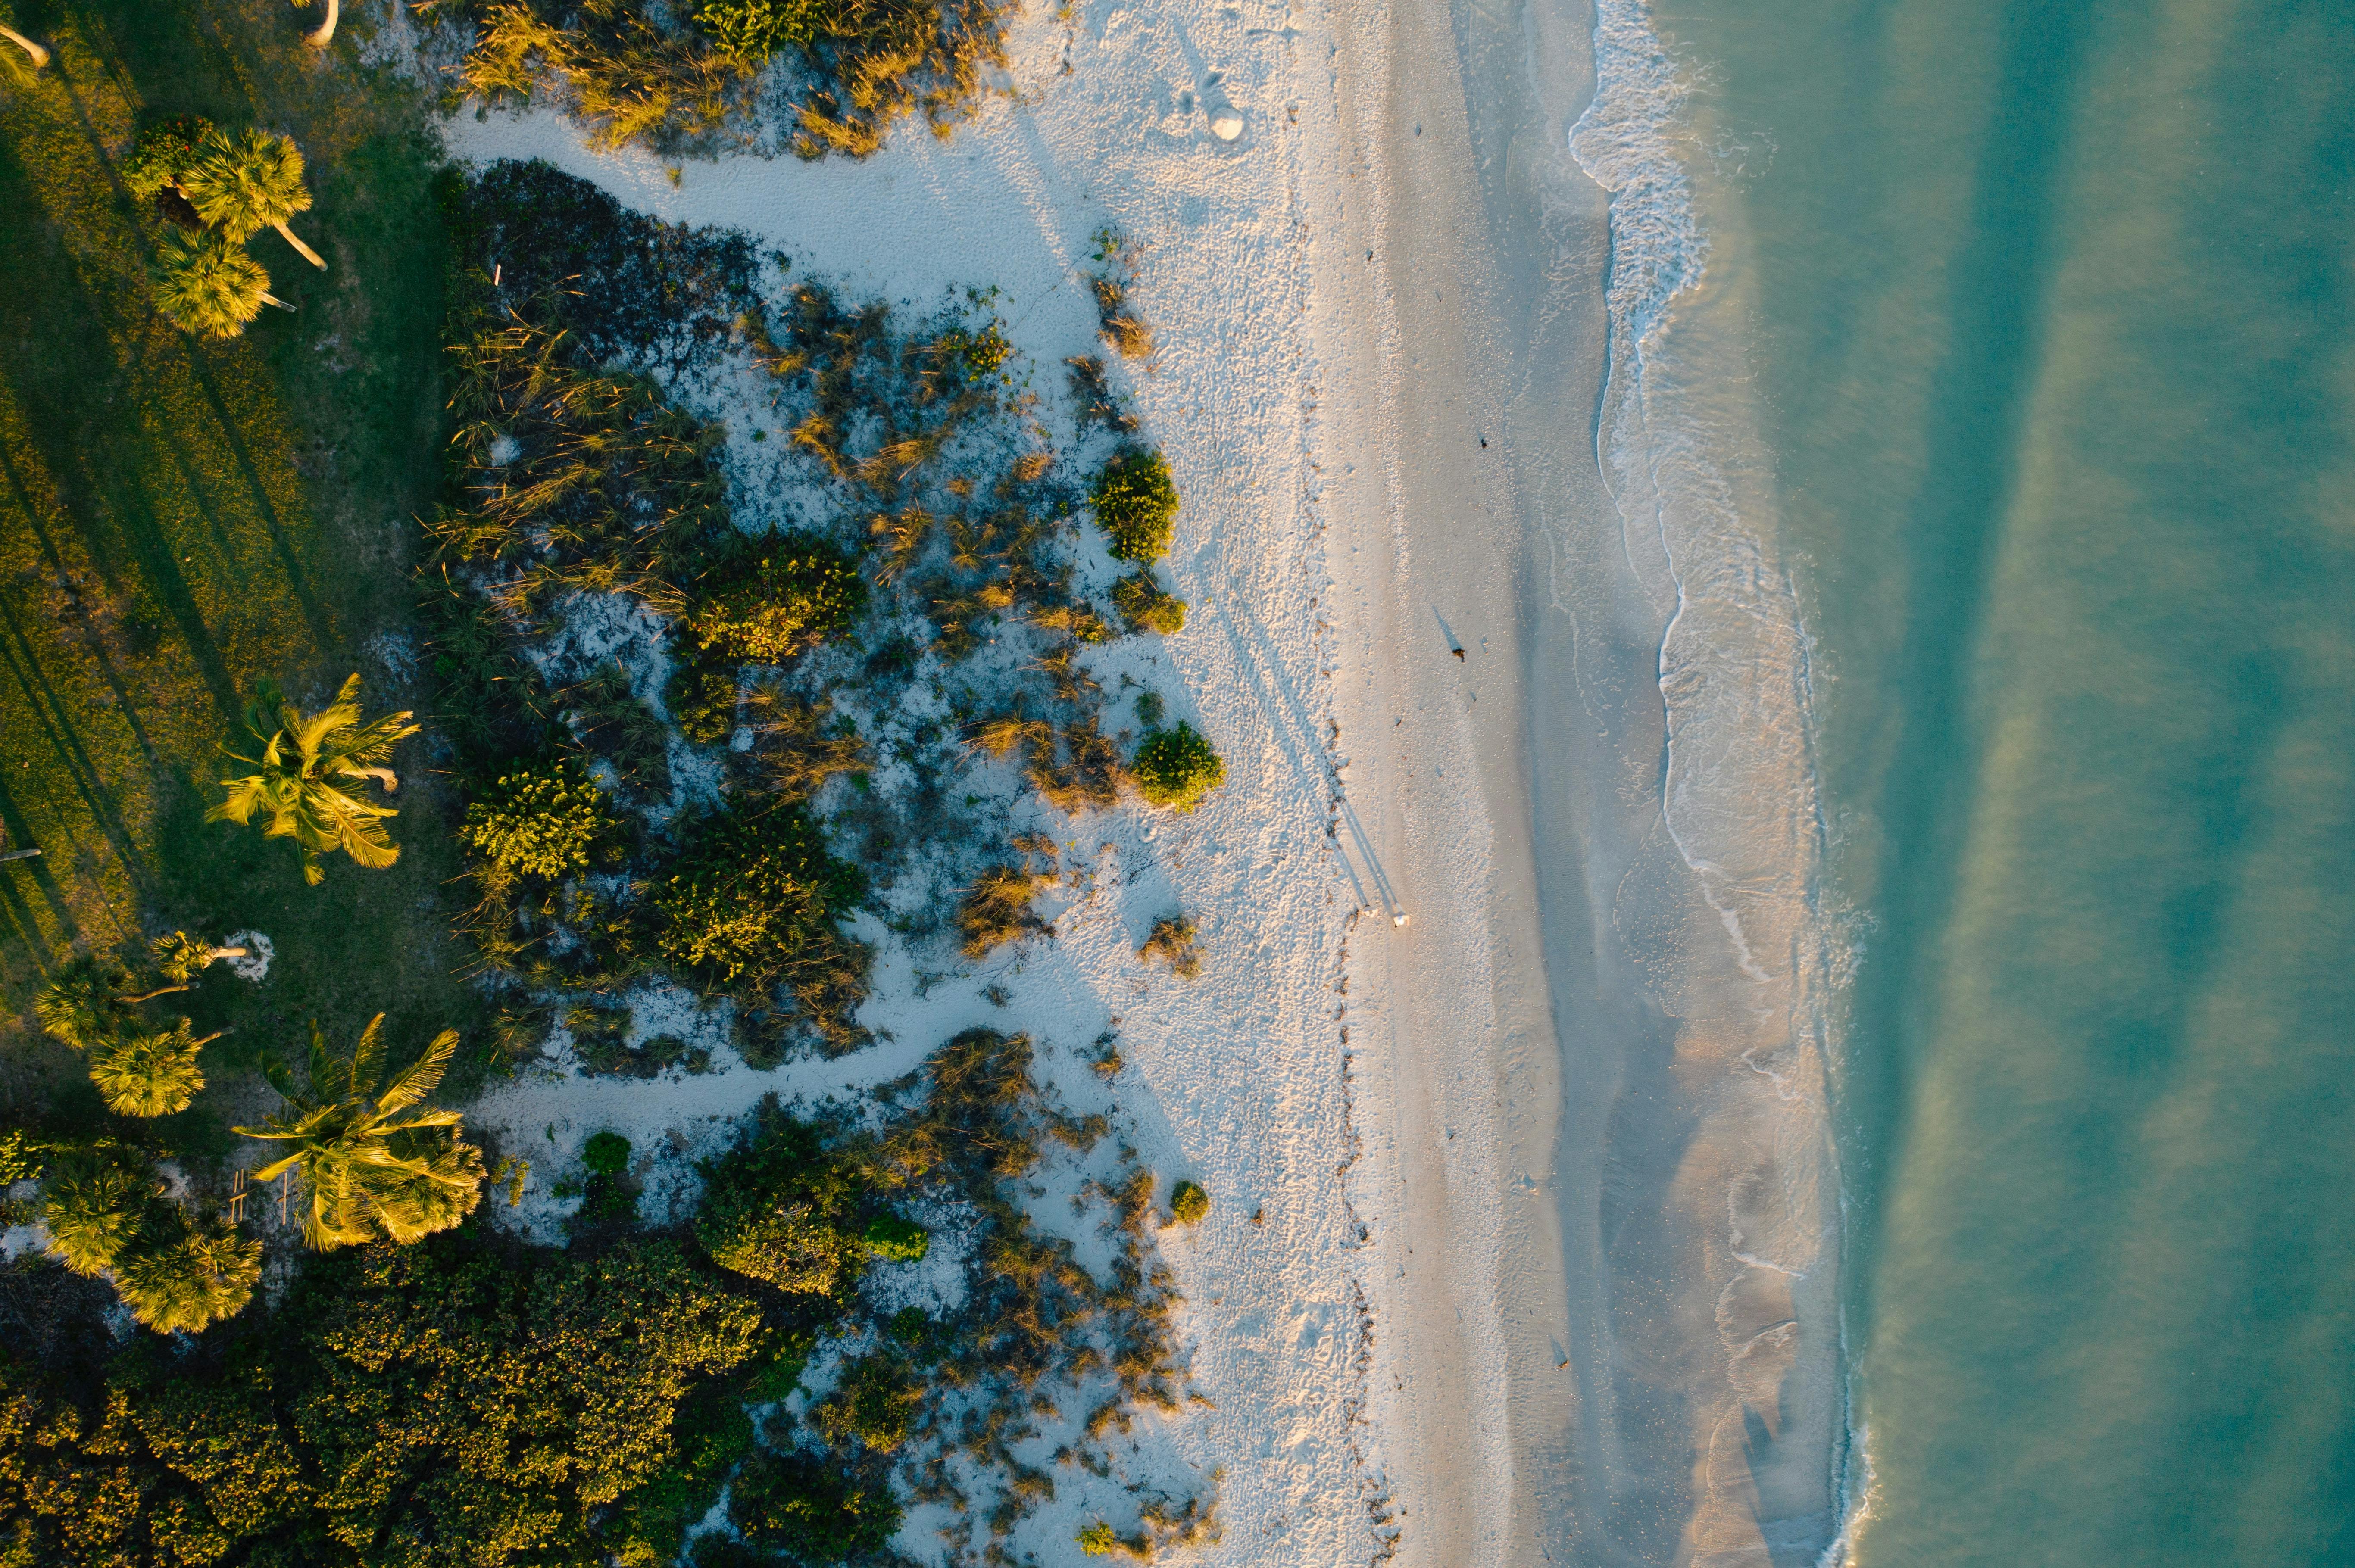 An aerial shot of green grass and palm trees transitioning into shrubs on the beach into sand and then the water.